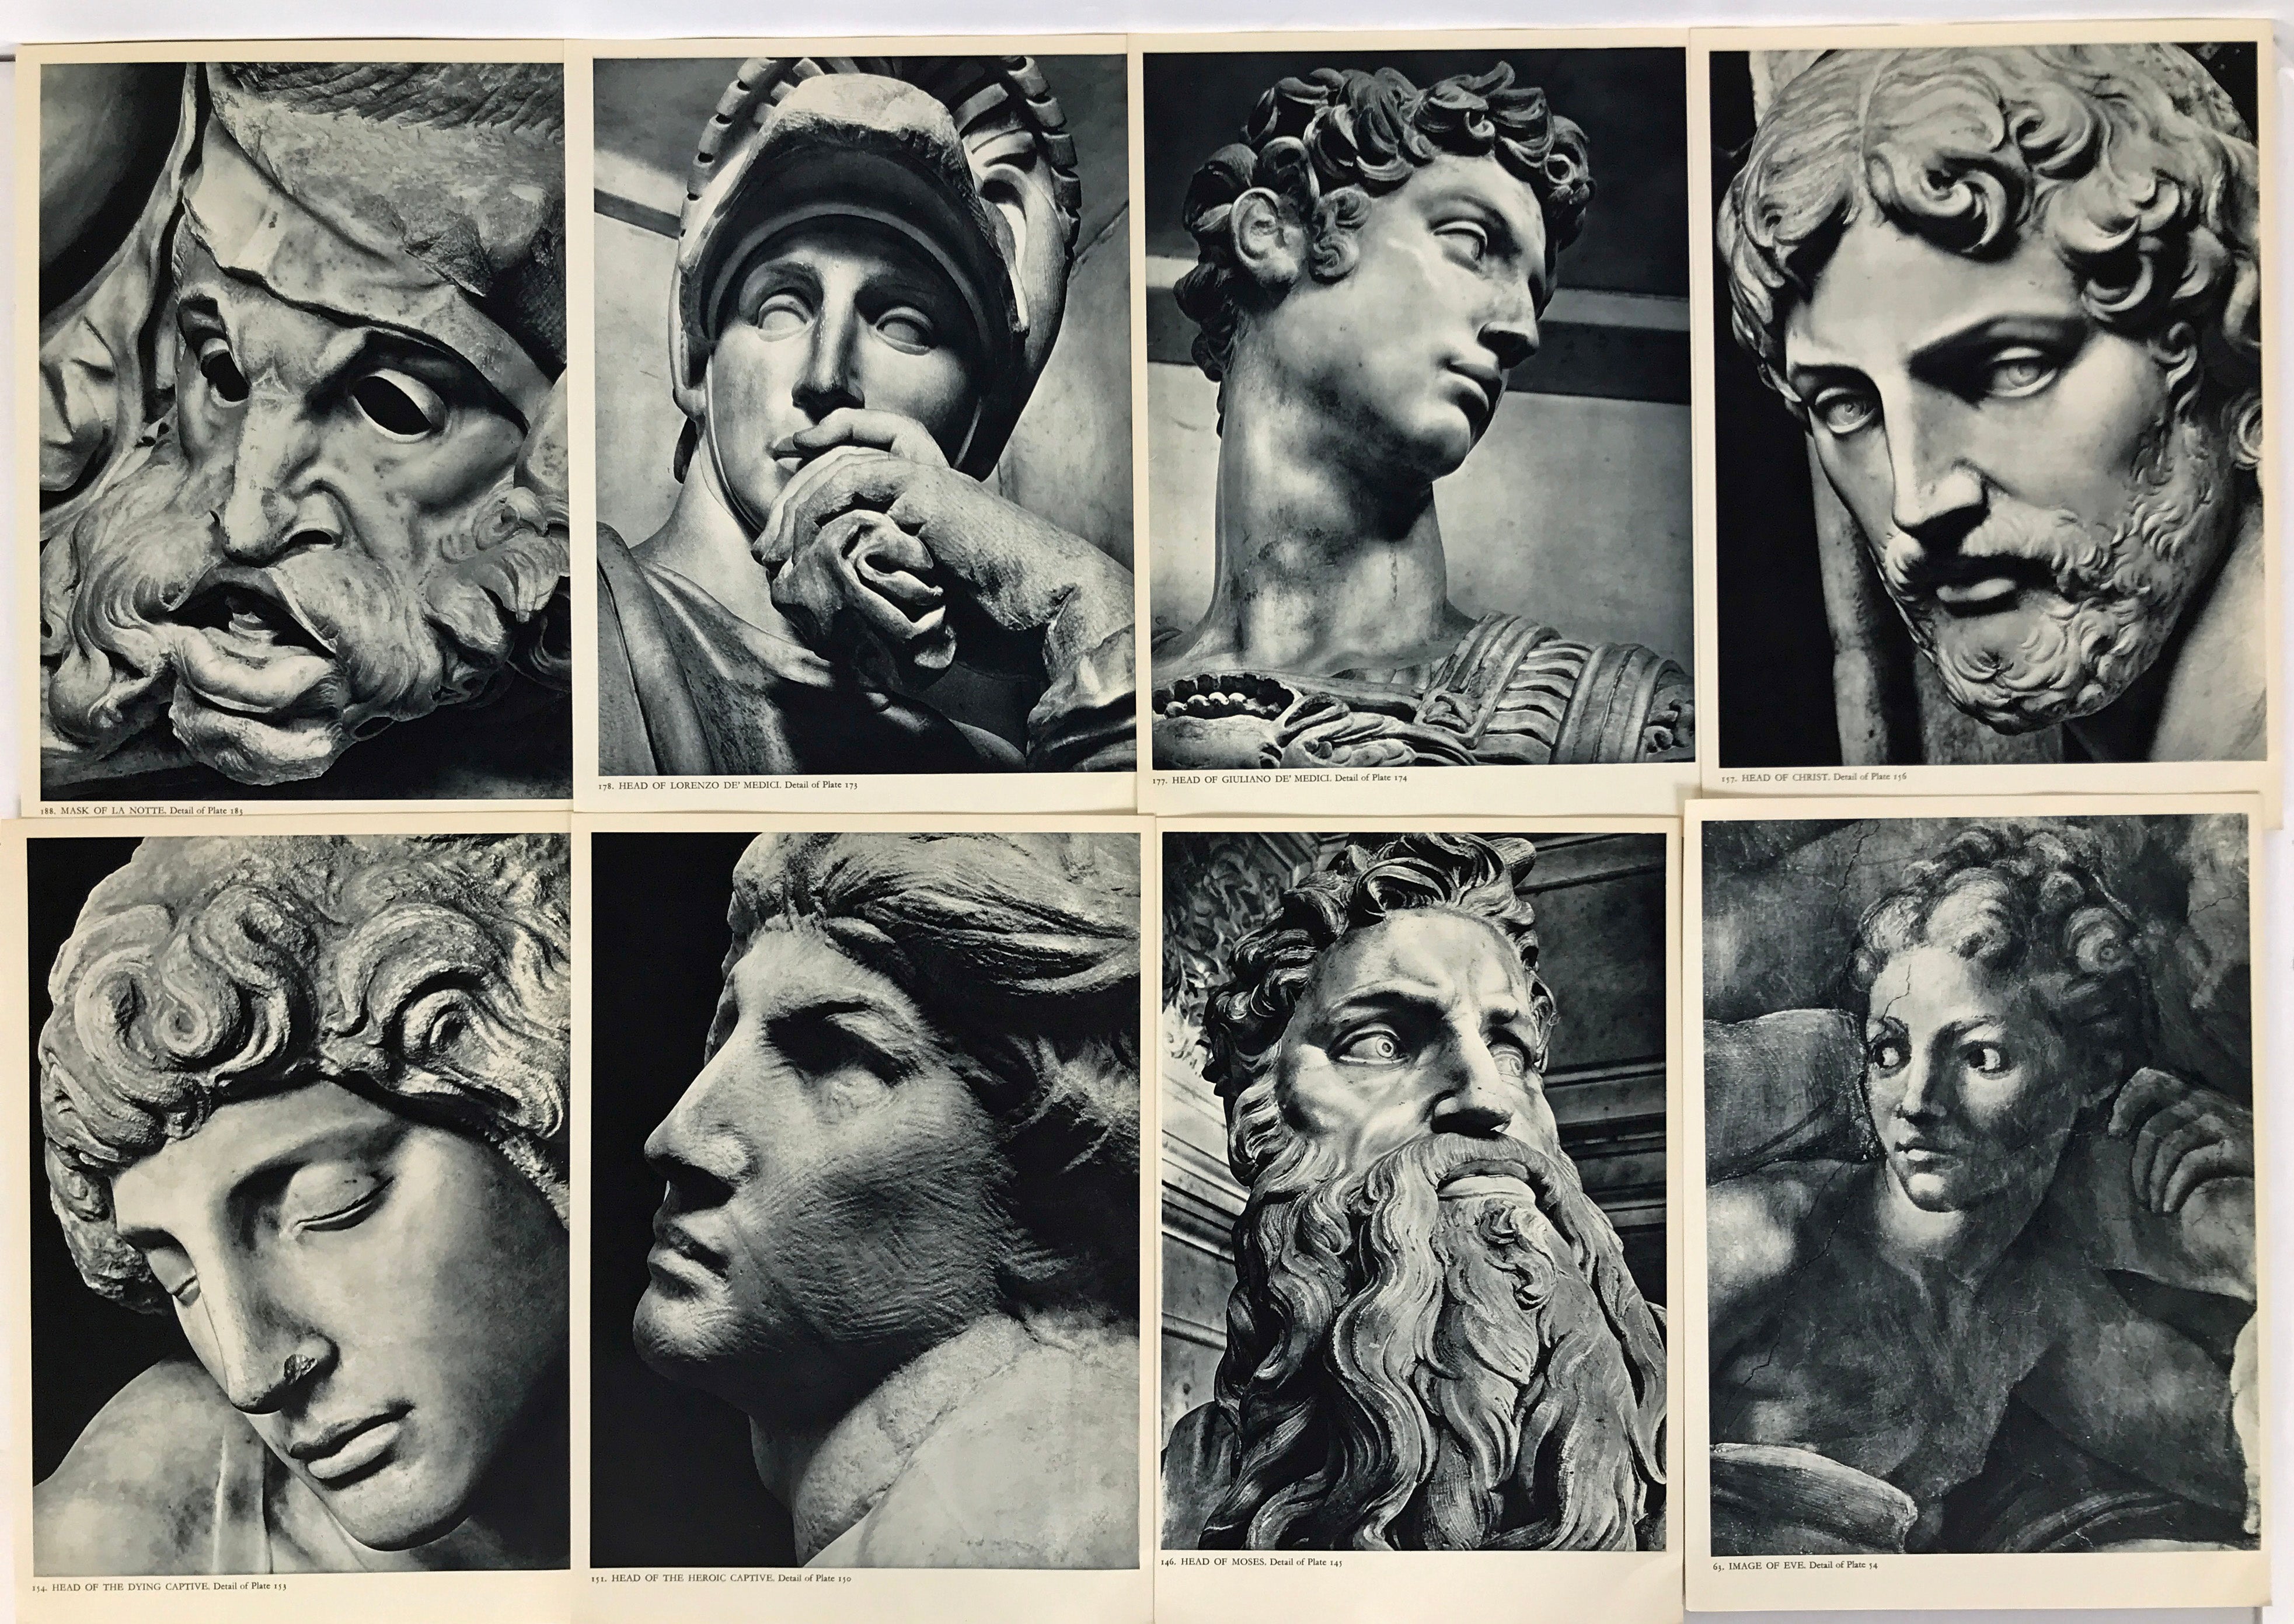 Assorted Black and White Close Up Prints by Michelangelo